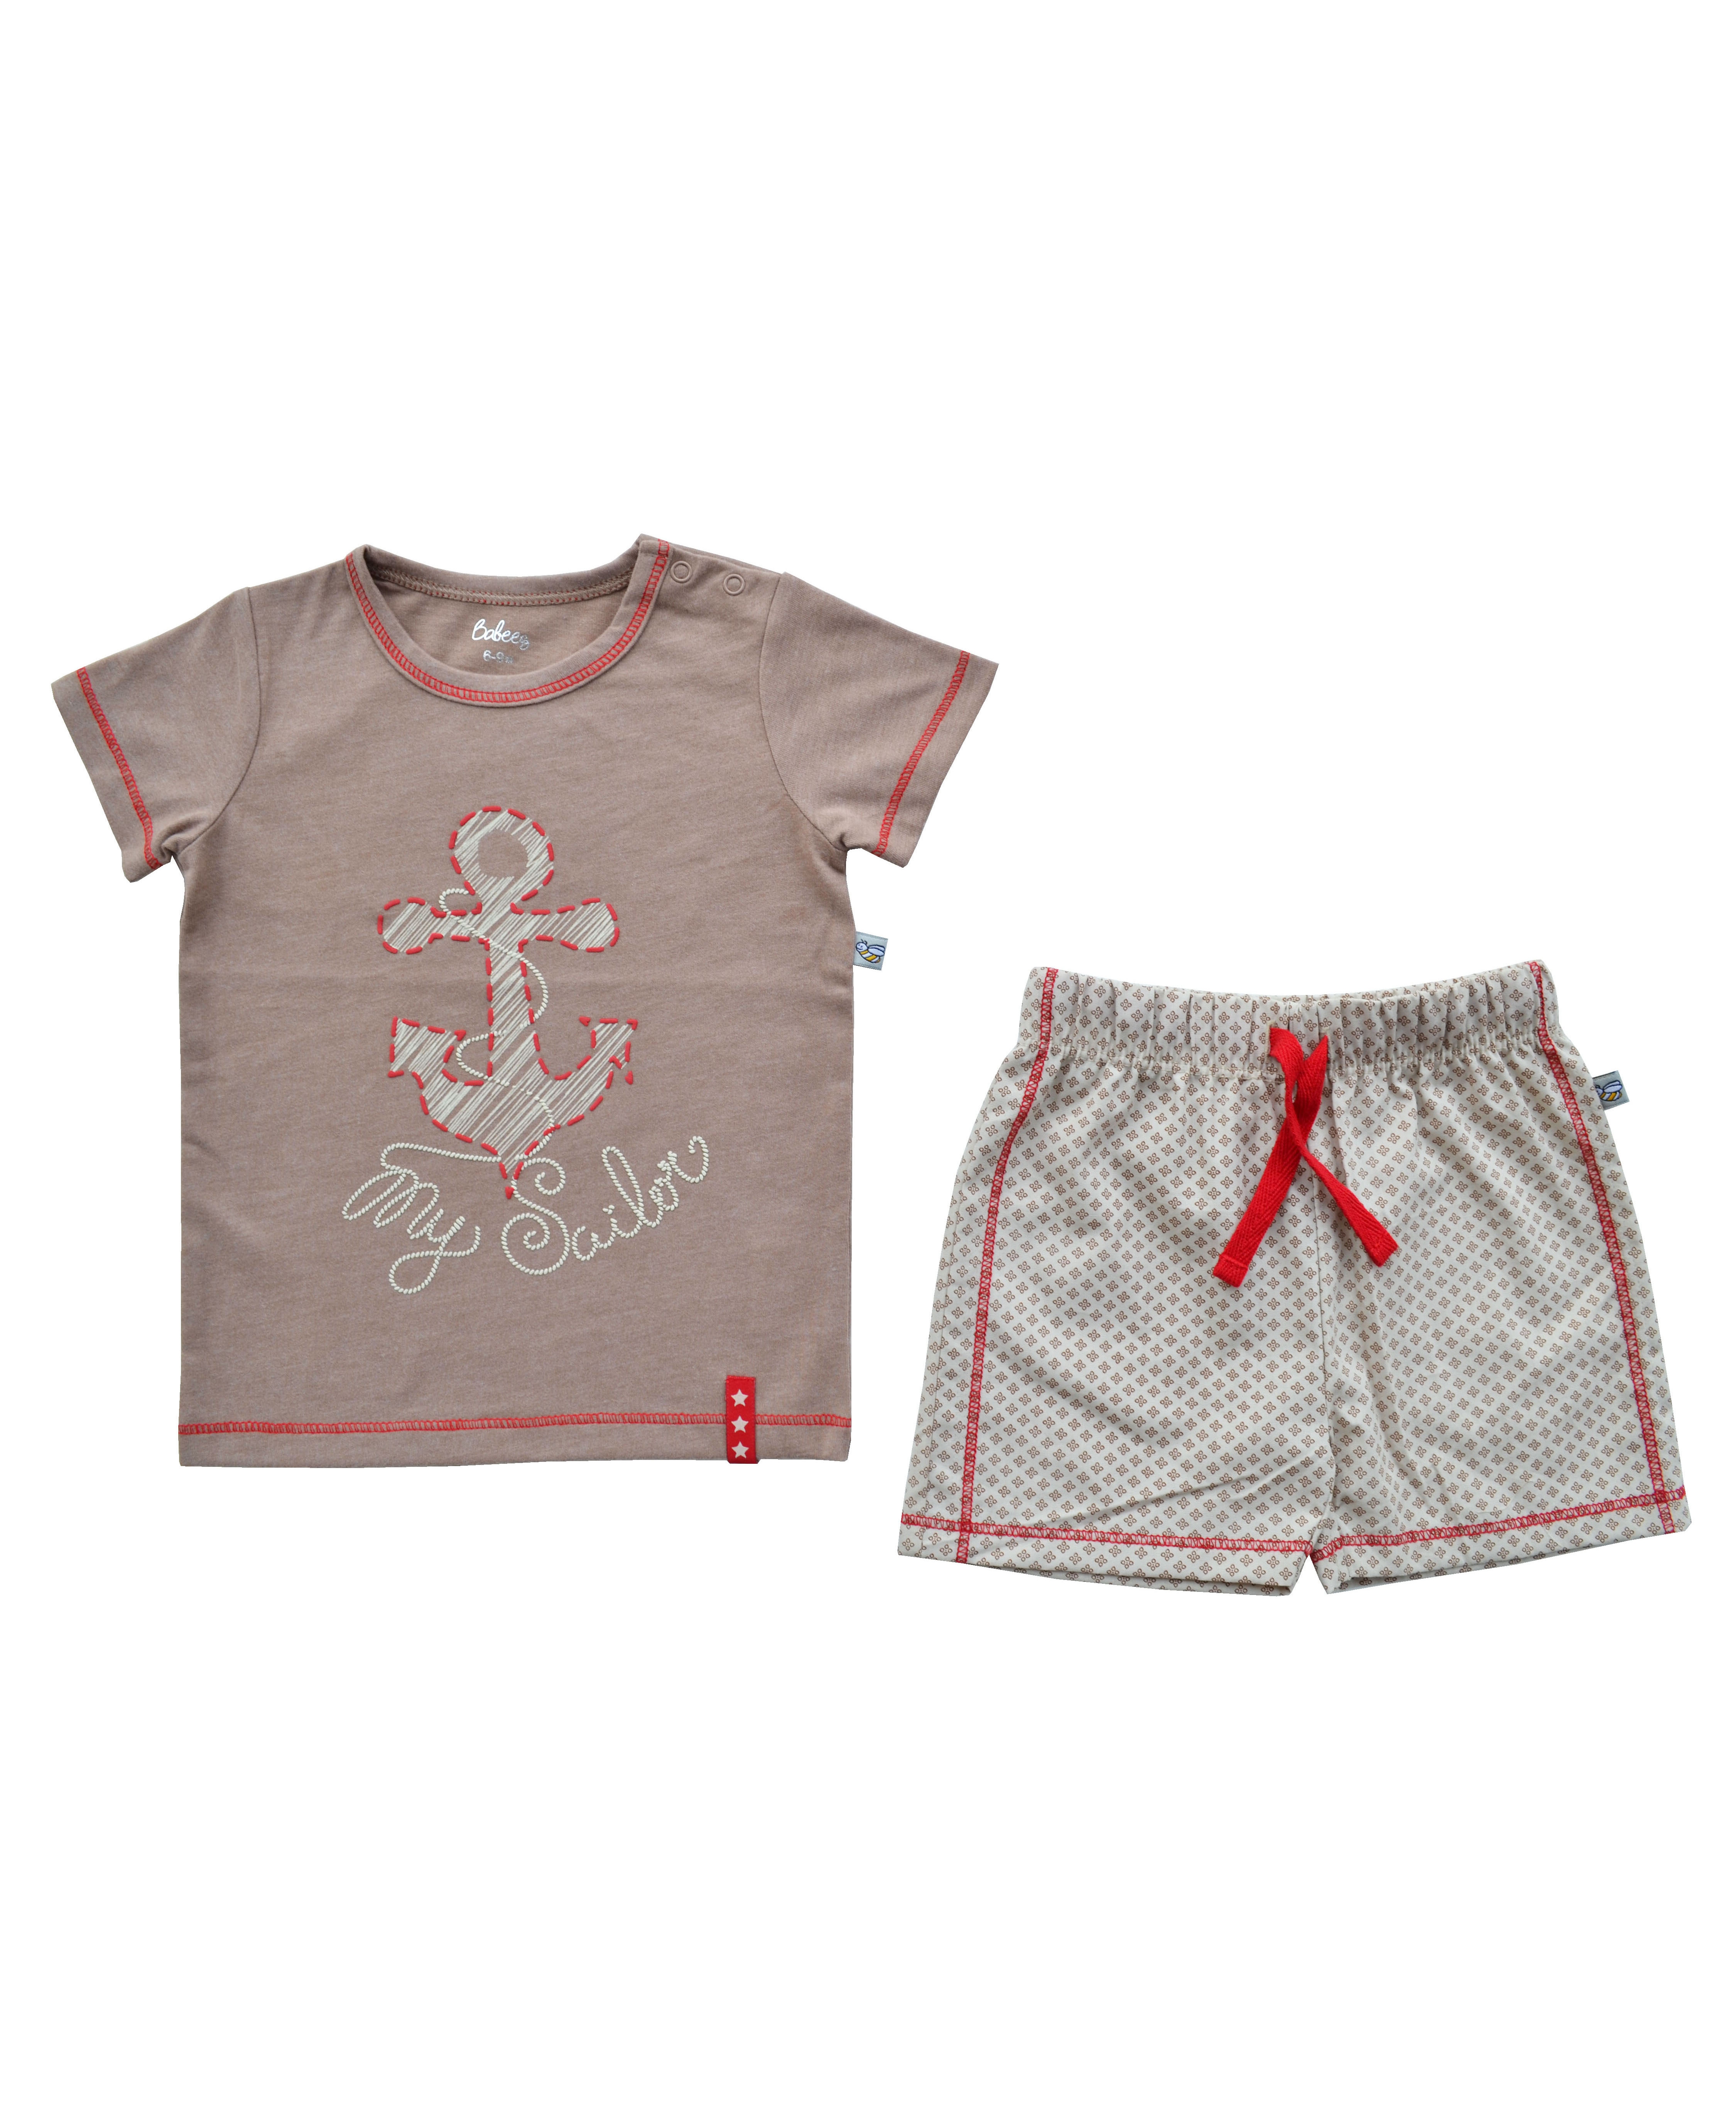 Brown Anchor Print T-Shirt + White Allover Printed Shorty Set (100% Cotton Jersey)